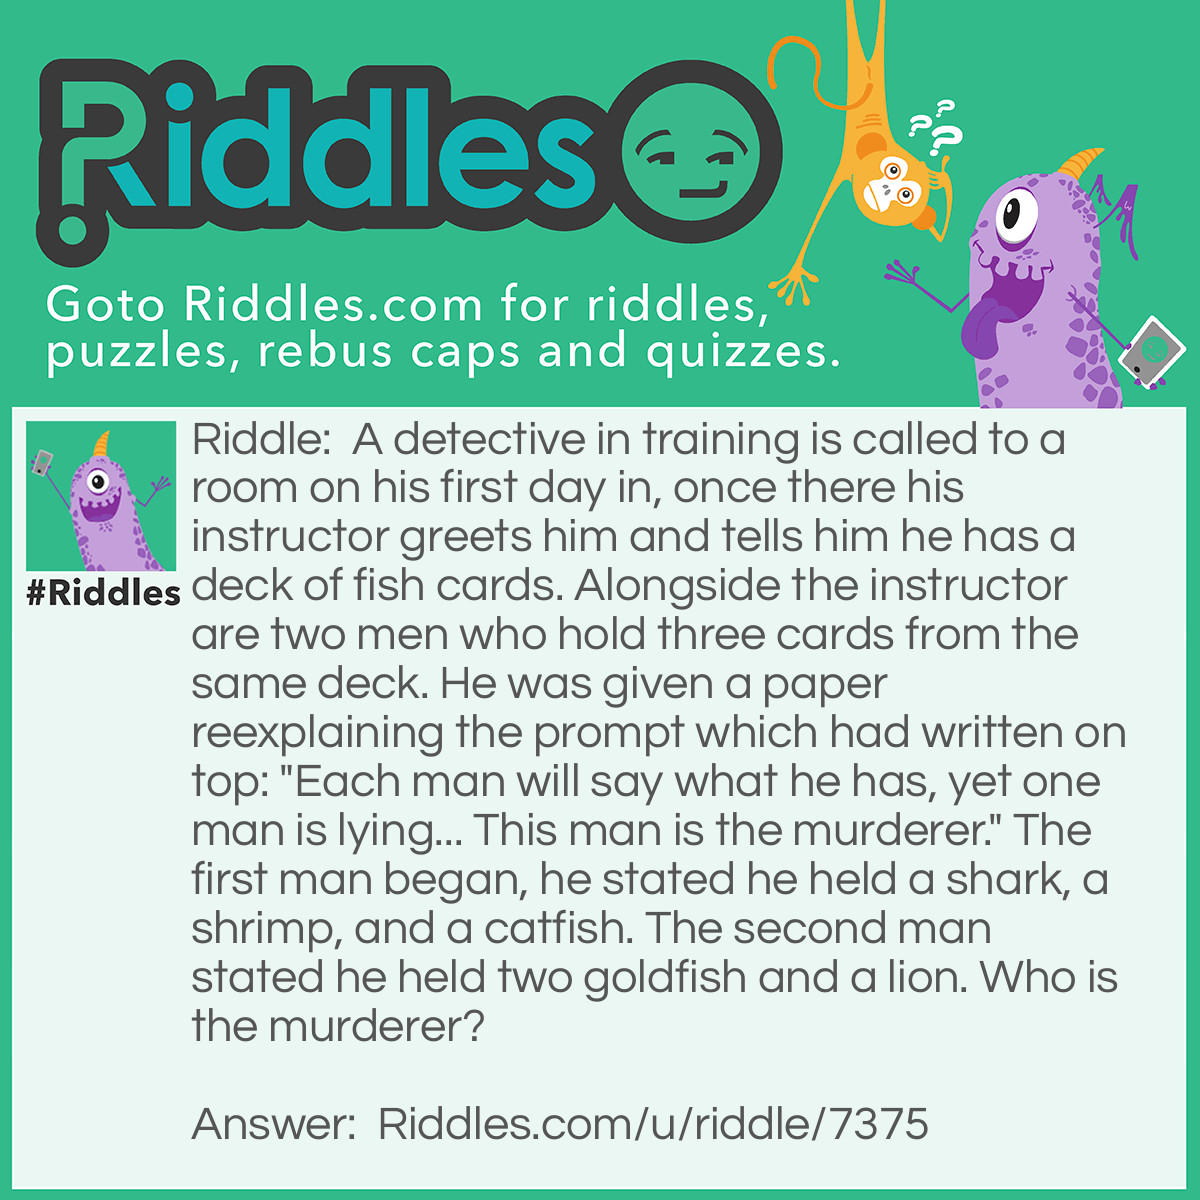 Riddle: A detective in training is called to a room on his first day in, once there his instructor greets him and tells him he has a deck of fish cards. Alongside the instructor are two men who hold three cards from the same deck. He was given a paper reexplaining the prompt which had written on top: "Each man will say what he has, yet one man is lying... This man is the murderer." The first man began, he stated he held a shark, a shrimp, and a catfish. The second man stated he held two goldfish and a lion. Who is the murderer? Answer: A common first answer is the second man, whereas a shrimp is not considered a fish in this case either... You can look over this again if you'd like now. The answer: The instructor There was only one liar, meaning if the deck was really of fish as the instructor said, they would both be lying in contrary to the prompt. Meaning the only way the statement could be true is if the instructor was the murderer.